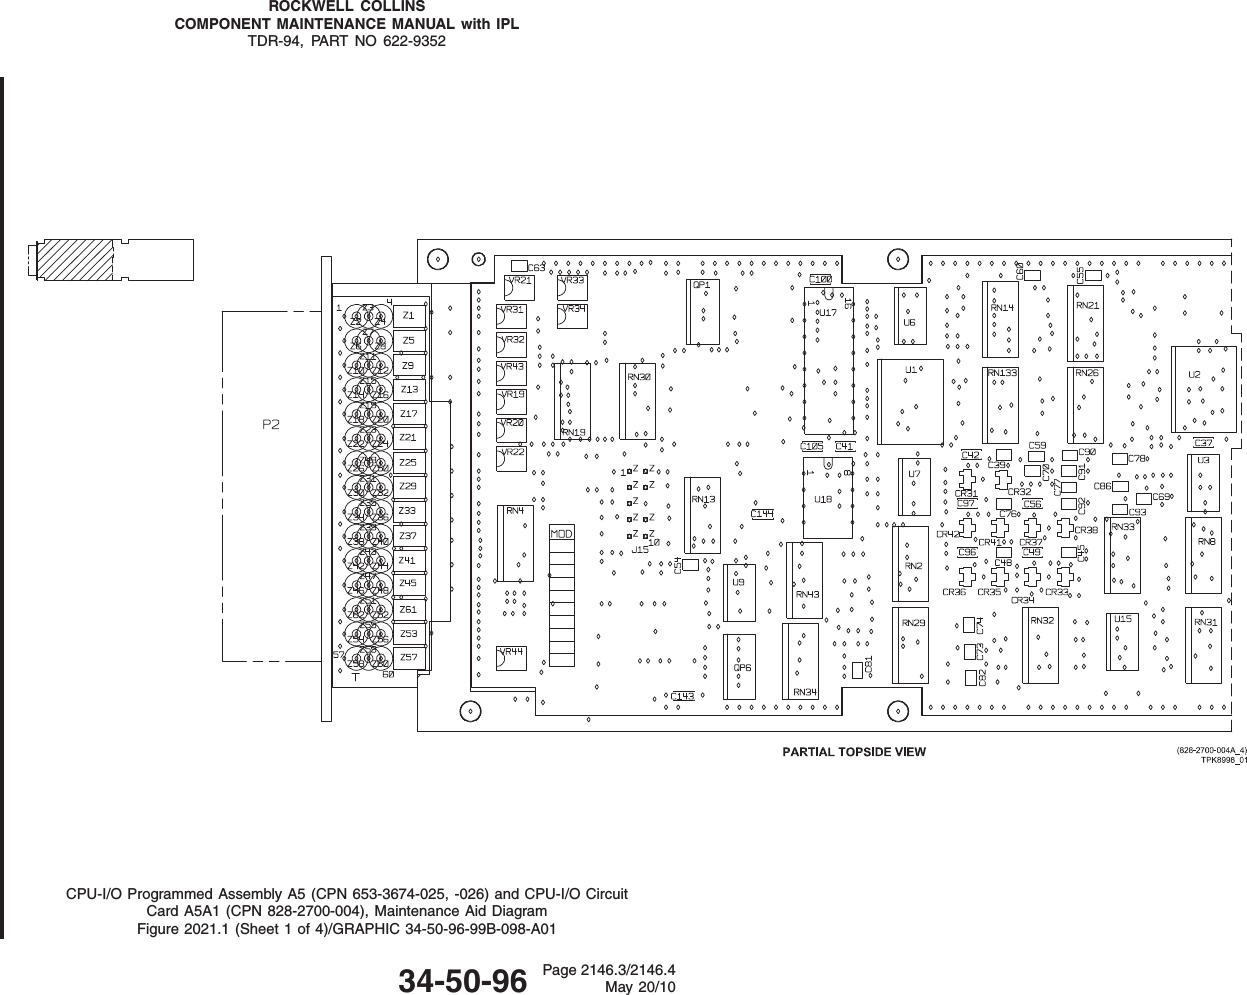 ROCKWELL COLLINSCOMPONENT MAINTENANCE MANUAL with IPLTDR-94, PART NO 622-9352CPU-I/O Programmed Assembly A5 (CPN 653-3674-025, -026) and CPU-I/O CircuitCard A5A1 (CPN 828-2700-004), Maintenance Aid DiagramFigure 2021.1 (Sheet 1 of 4)/GRAPHIC 34-50-96-99B-098-A0134-50-96 Page 2146.3/2146.4May 20/10